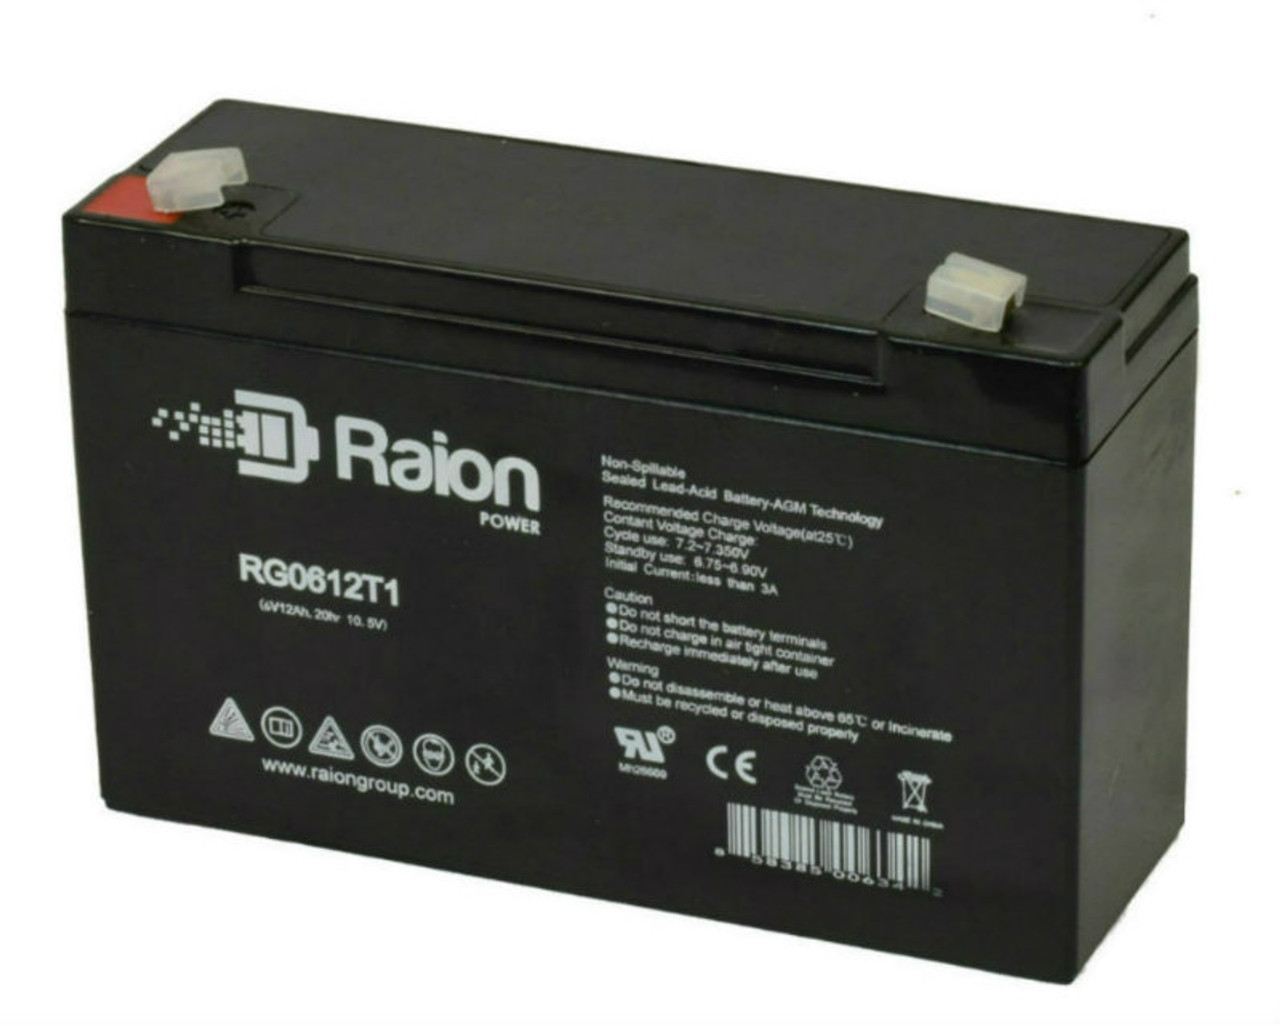 Raion Power RG06120T1 Replacement Battery for Alaris Medical 1320 Medical Equipment